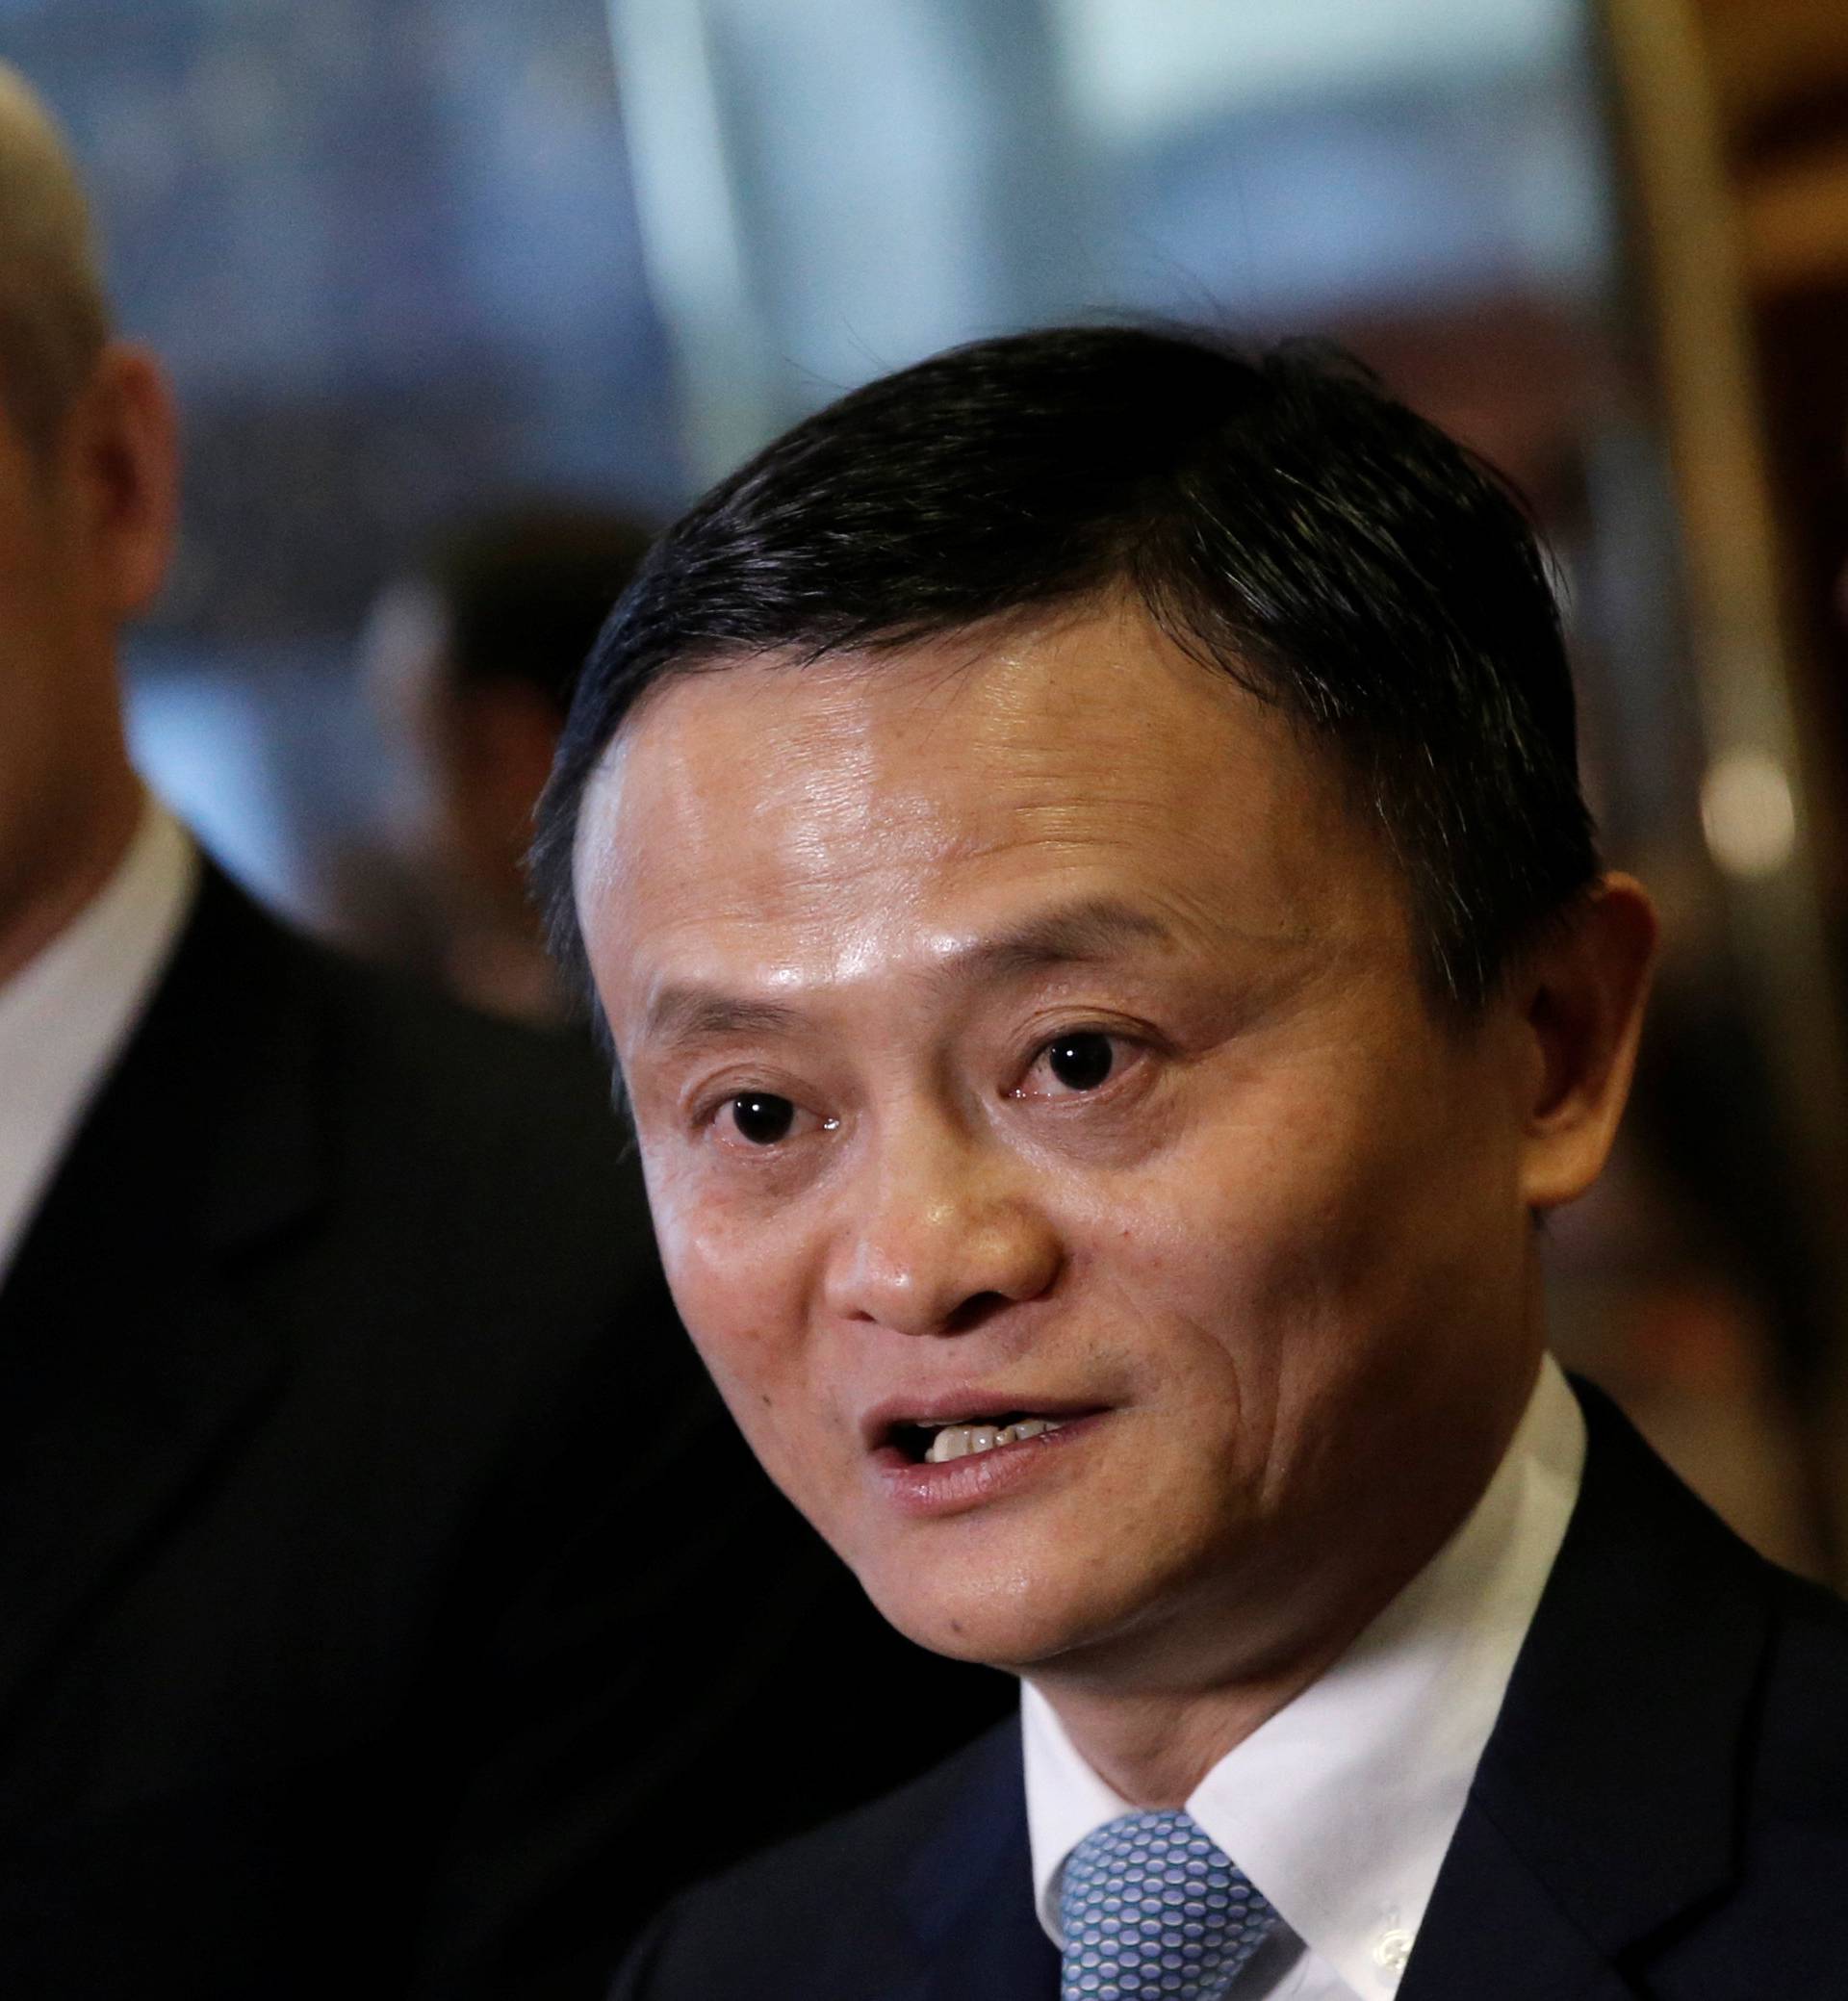 Alibaba executive chairman Jack Ma speaks to reporters after meeting with U.S. President-elect Donald Trump at Trump Tower in New York